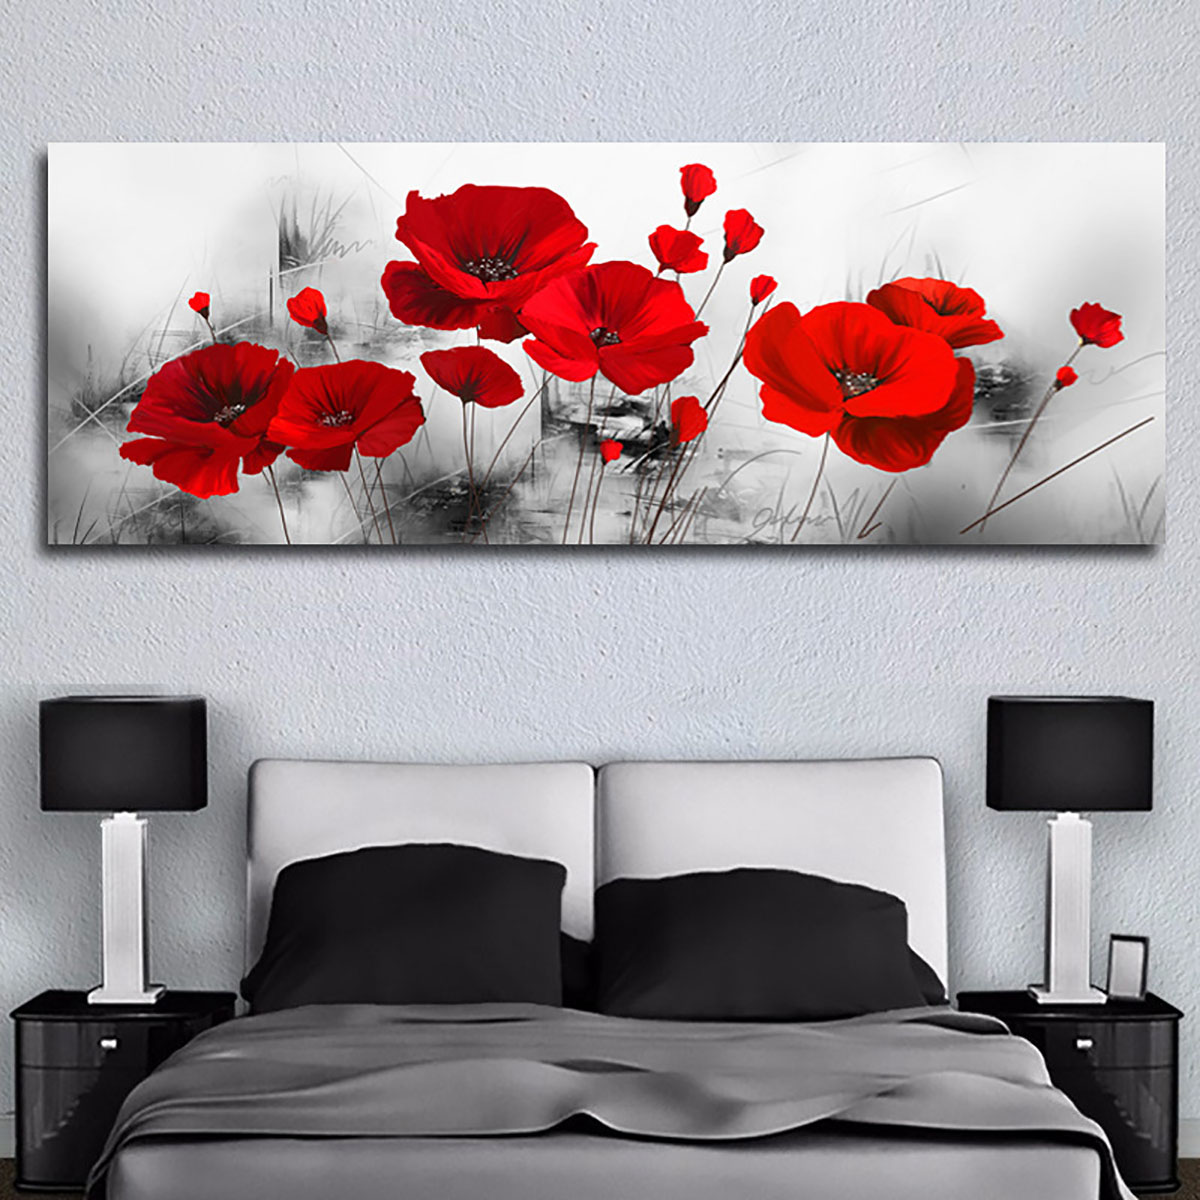 Abstract Flowers Canvas Painting Wall Decorative Printing Art Picture Frameless Home Office Decoration